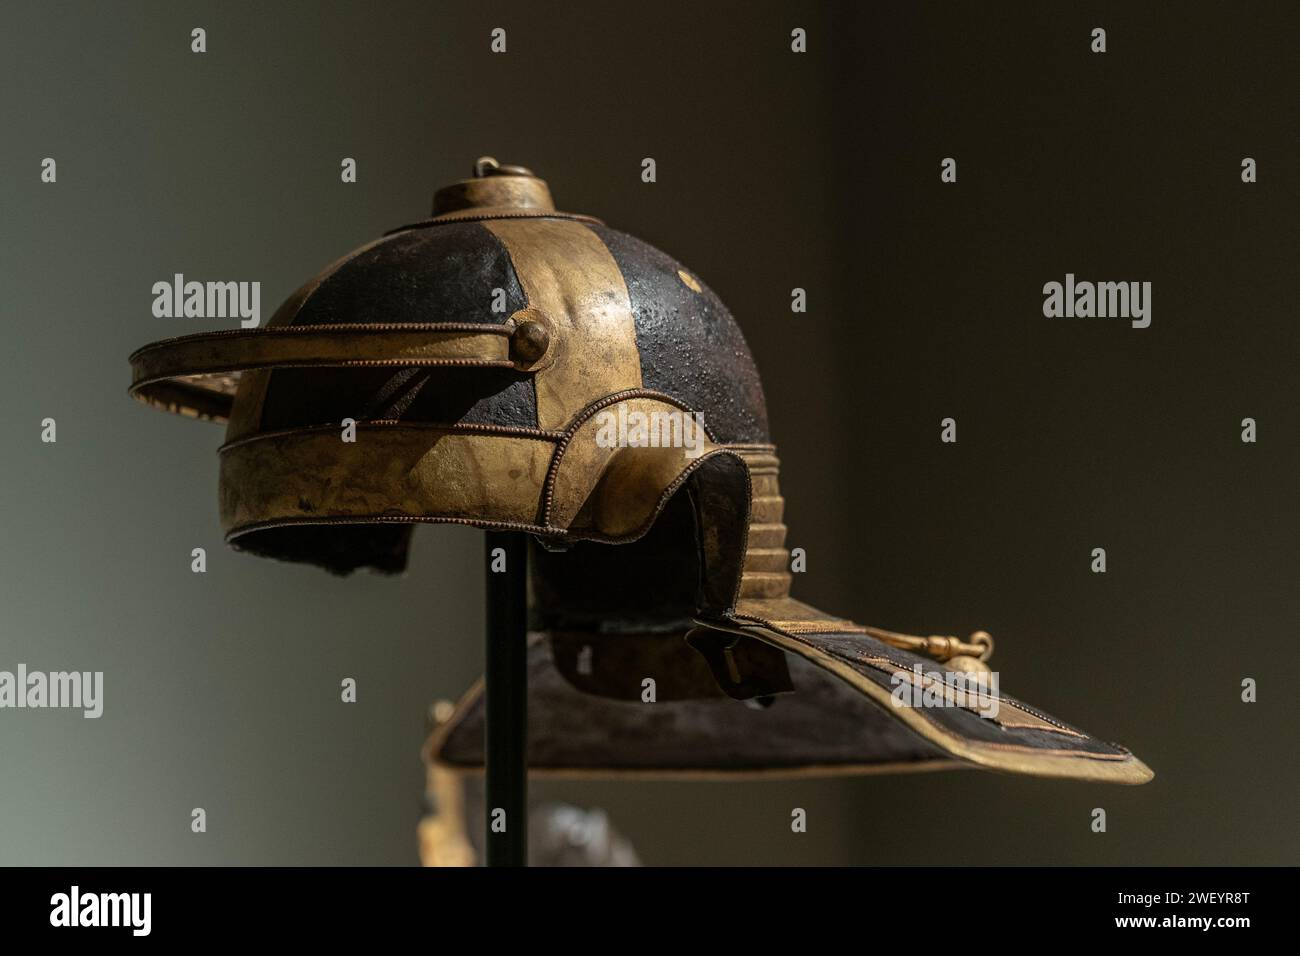 Roman Iron, Brass and Copper Helmet from 2nd century A.D. from Mougins Museum of Classical Art Collection seen during press preview ahead of auction on Christie's in New York on January 26, 2024 Stock Photo